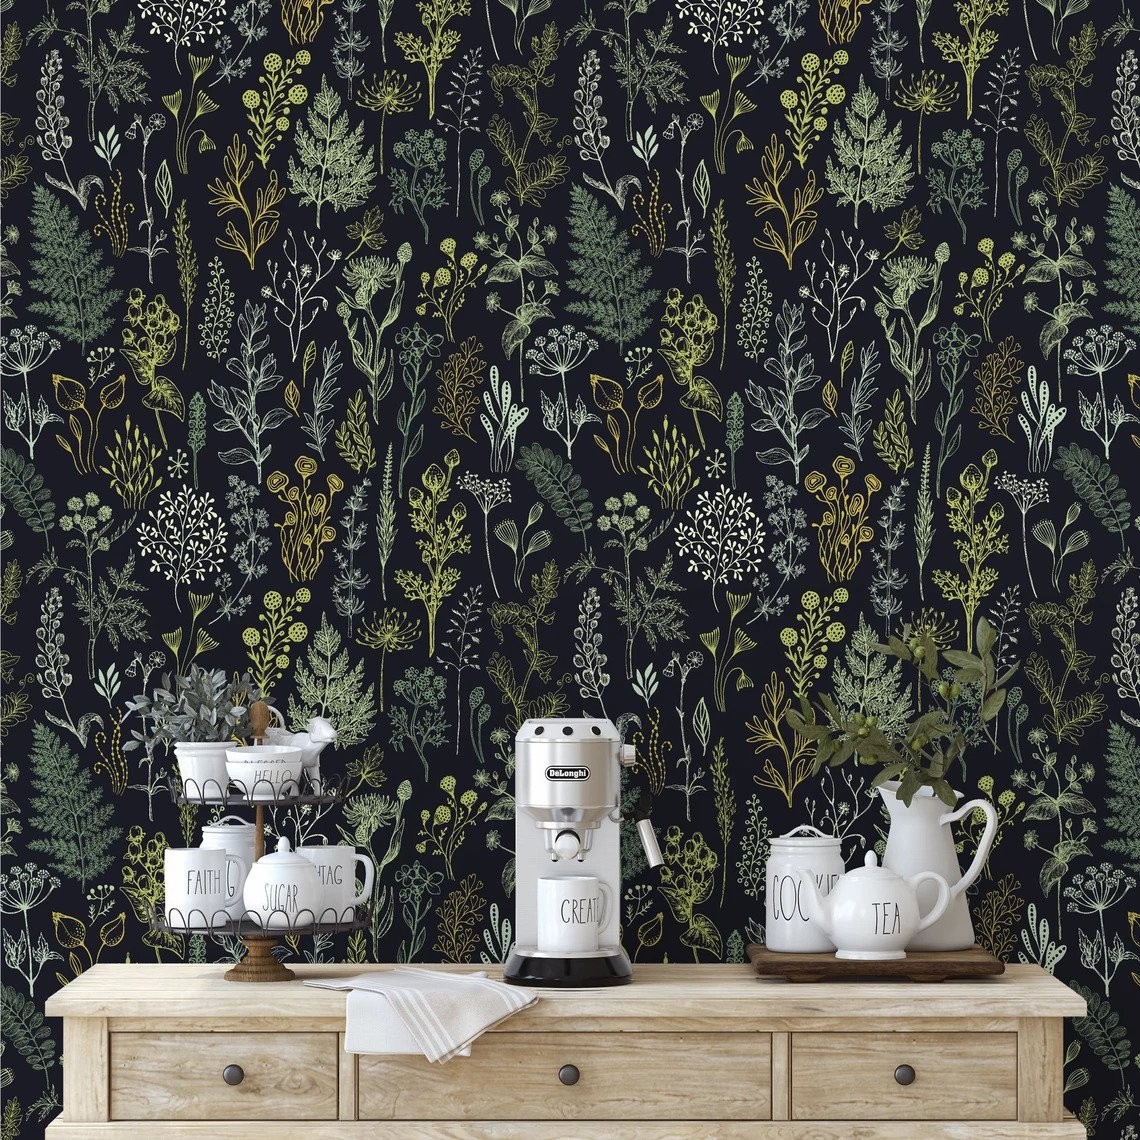 Floral pattern wallpaper inspired by Harry Potter